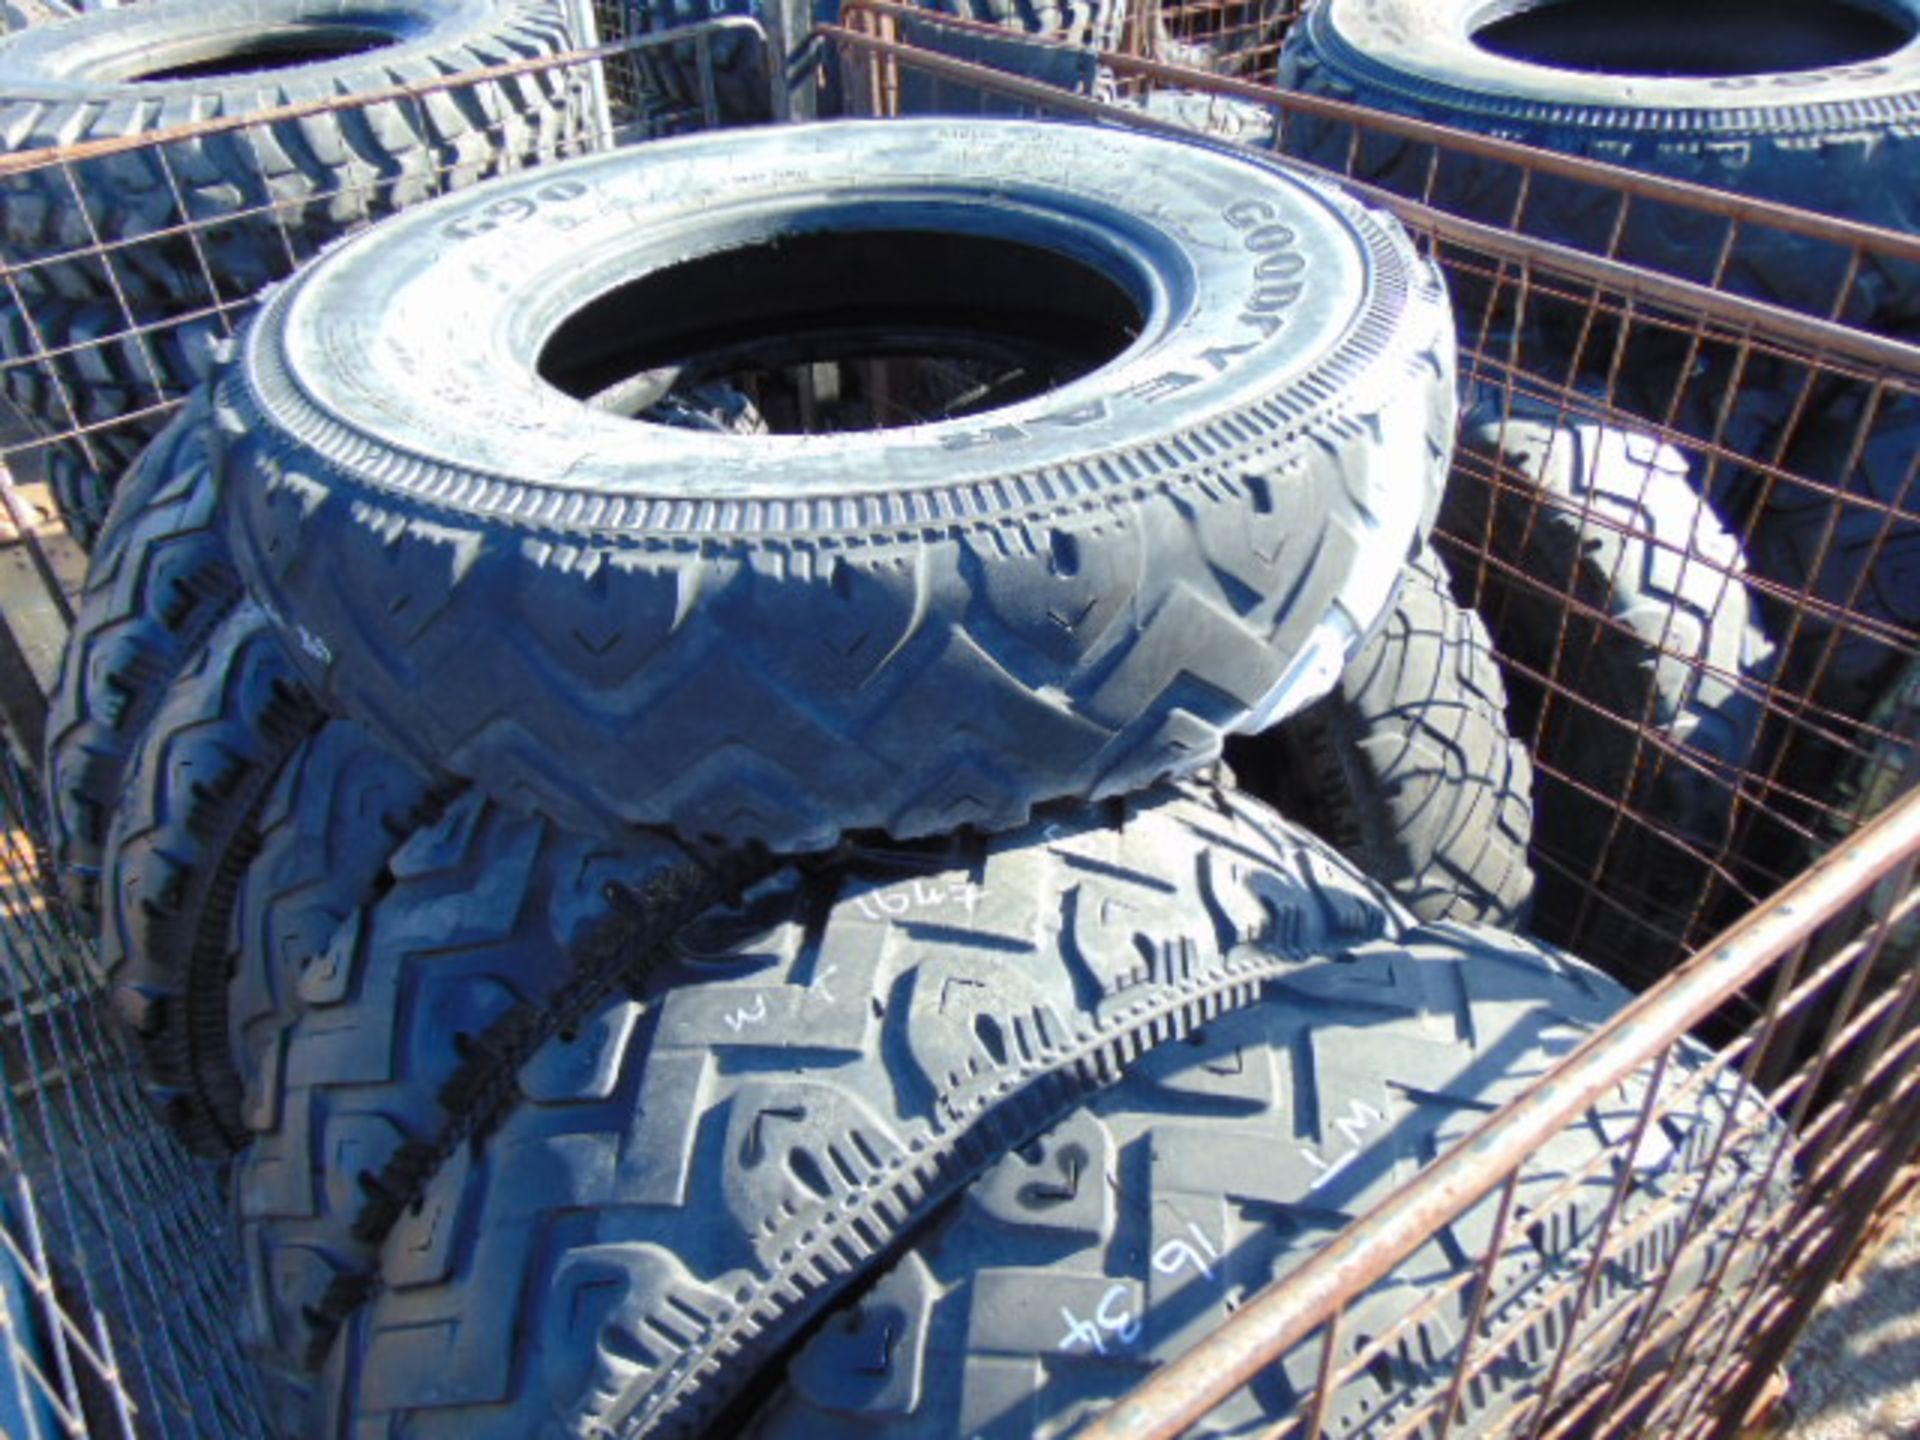 45 x Goodyear G90 7.50 R16 Tyres - Image 6 of 9